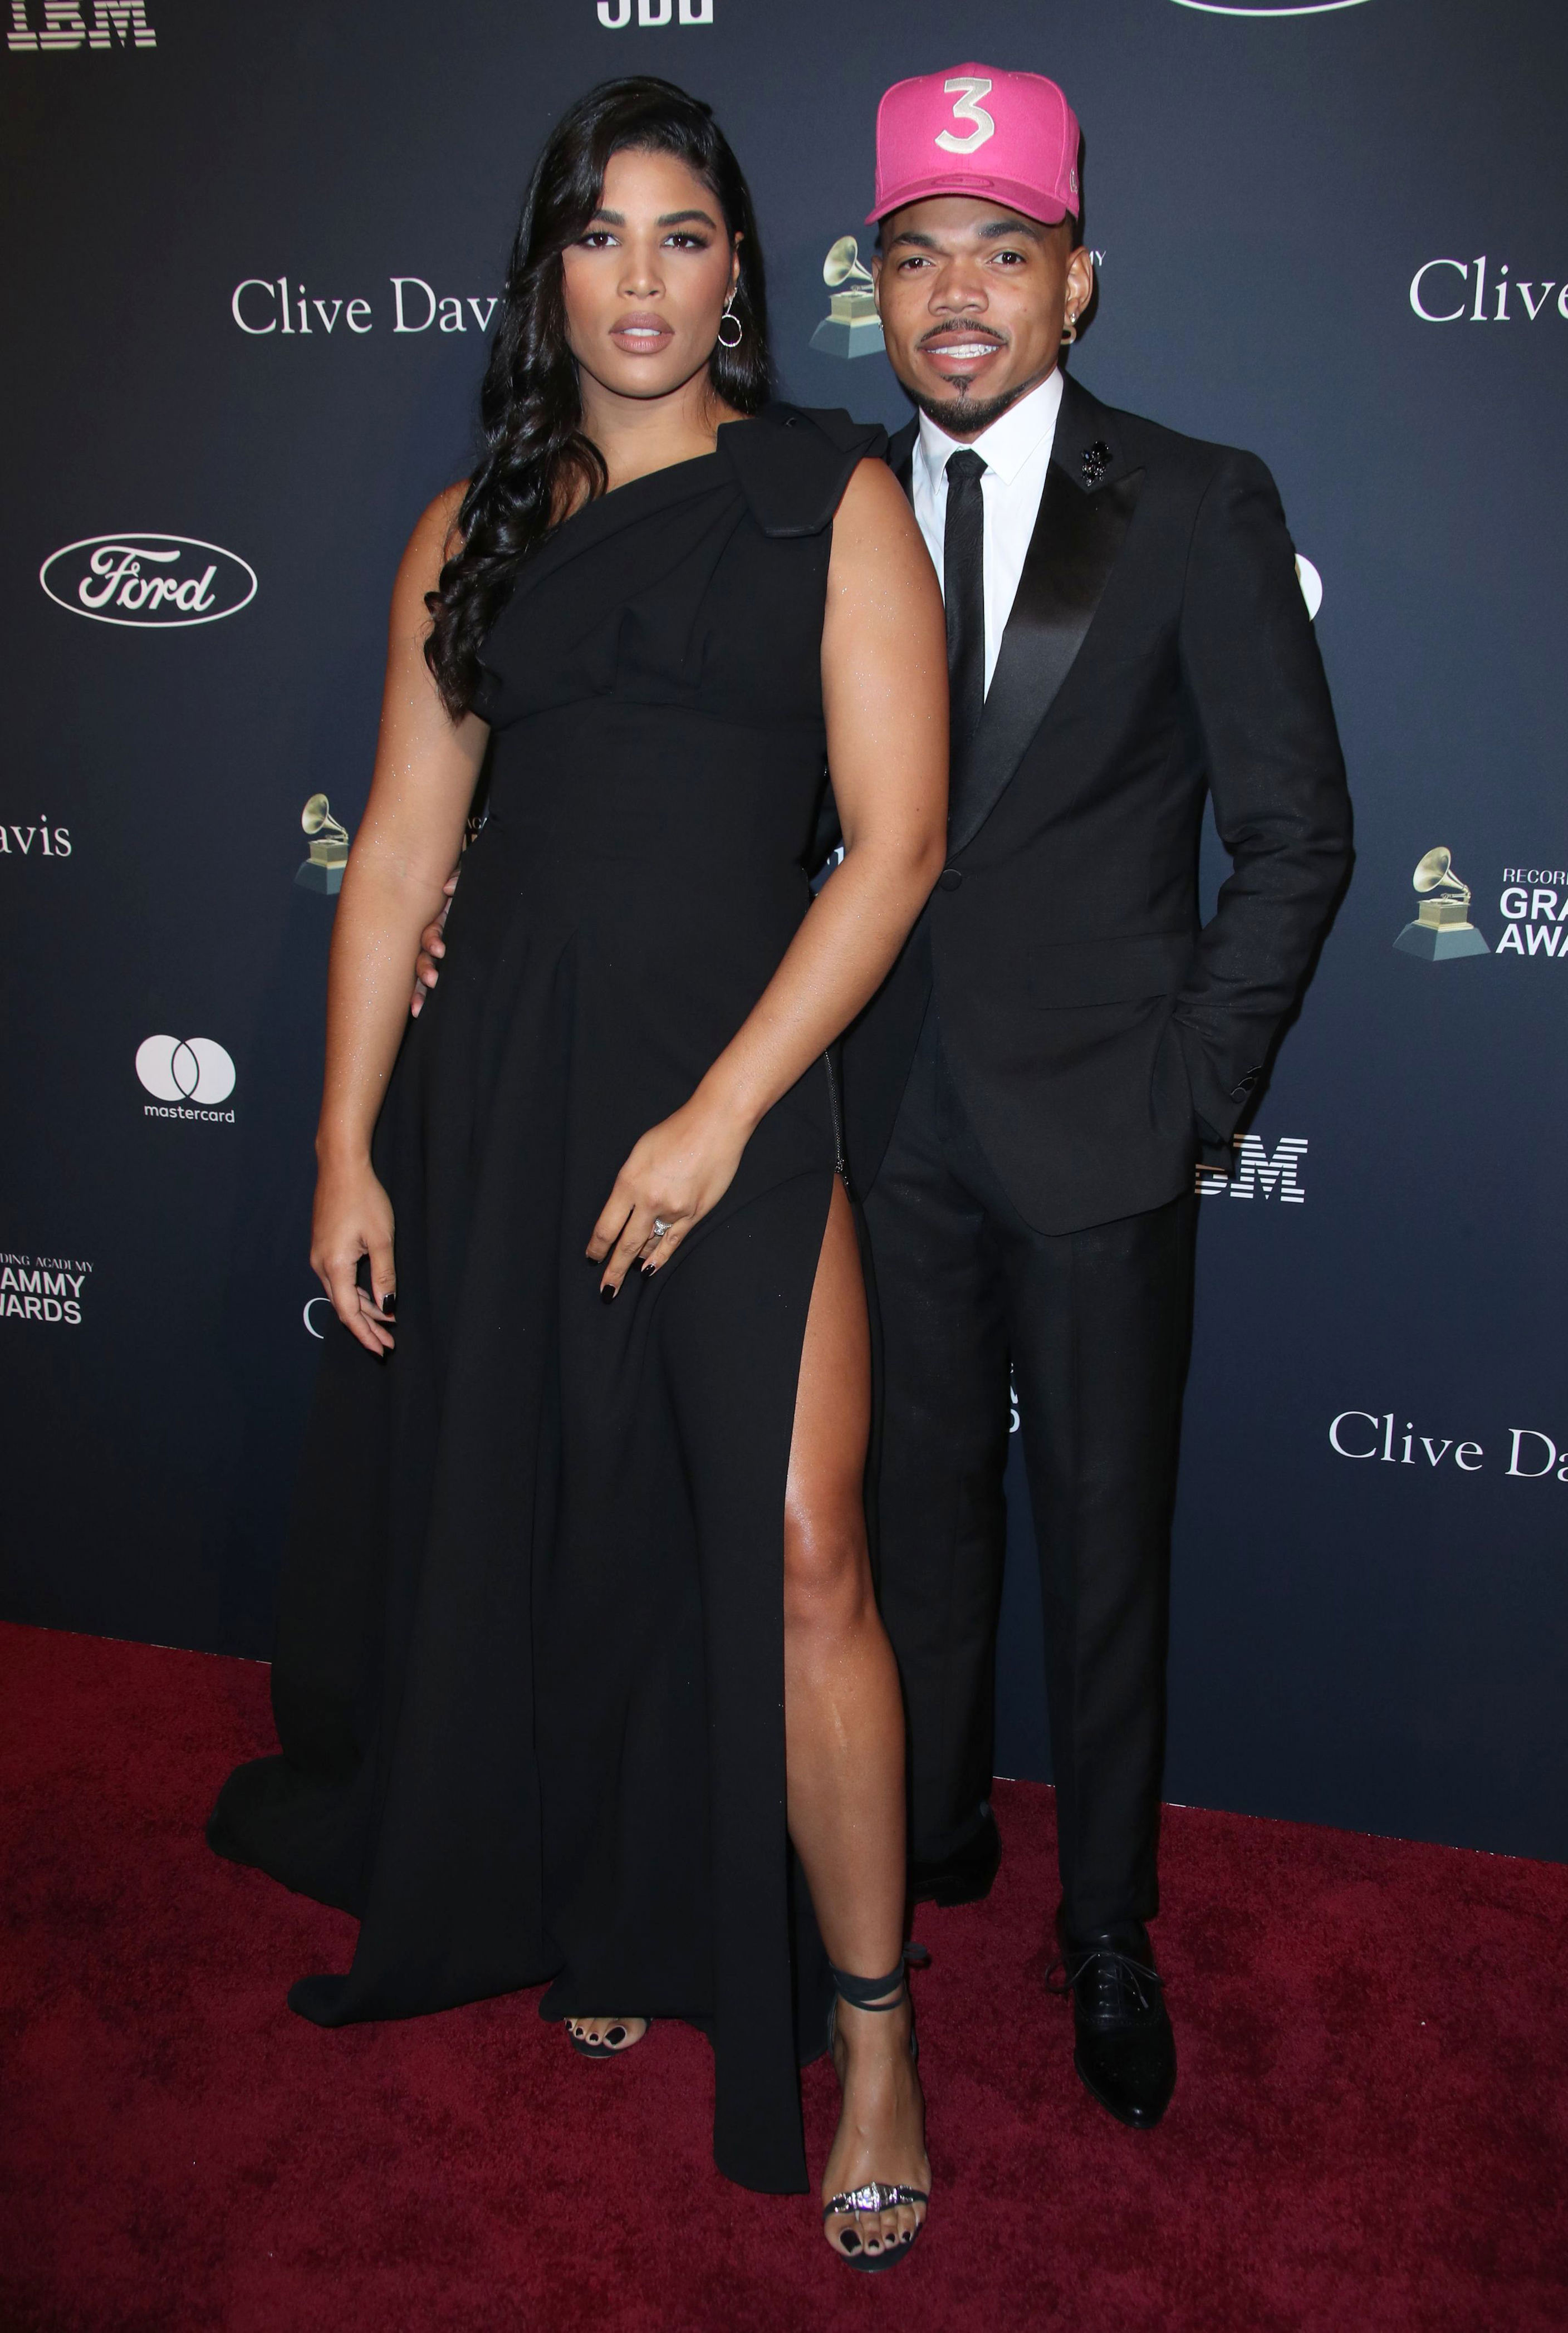 <p>In March 2019, Chance the Rapper revealed on Twitter that he met <a href="https://www.wonderwall.com/news/chance-rapper-has-been-secretly-married-two-months-report-3018715.article">his wife</a>, Kirsten Corley, in 2003 when he was just 9 years old and his mom dragged him to an office party where Kirsten -- whom he described as "the prettiest girl" he'd seen in his "almost-a-decade of life on Earth" -- and two friends performed a choreographed dance routine to Destiny's Child's "Independent Women." Chance's dad then encouraged him to perform a dance routine of his own, but he refused because it "wasn't the time or place." Wrote Chance, "I knew I was gonna marry that girl. And I [didn't] wanna jump the gun." He then described their marriage as "destiny."</p>